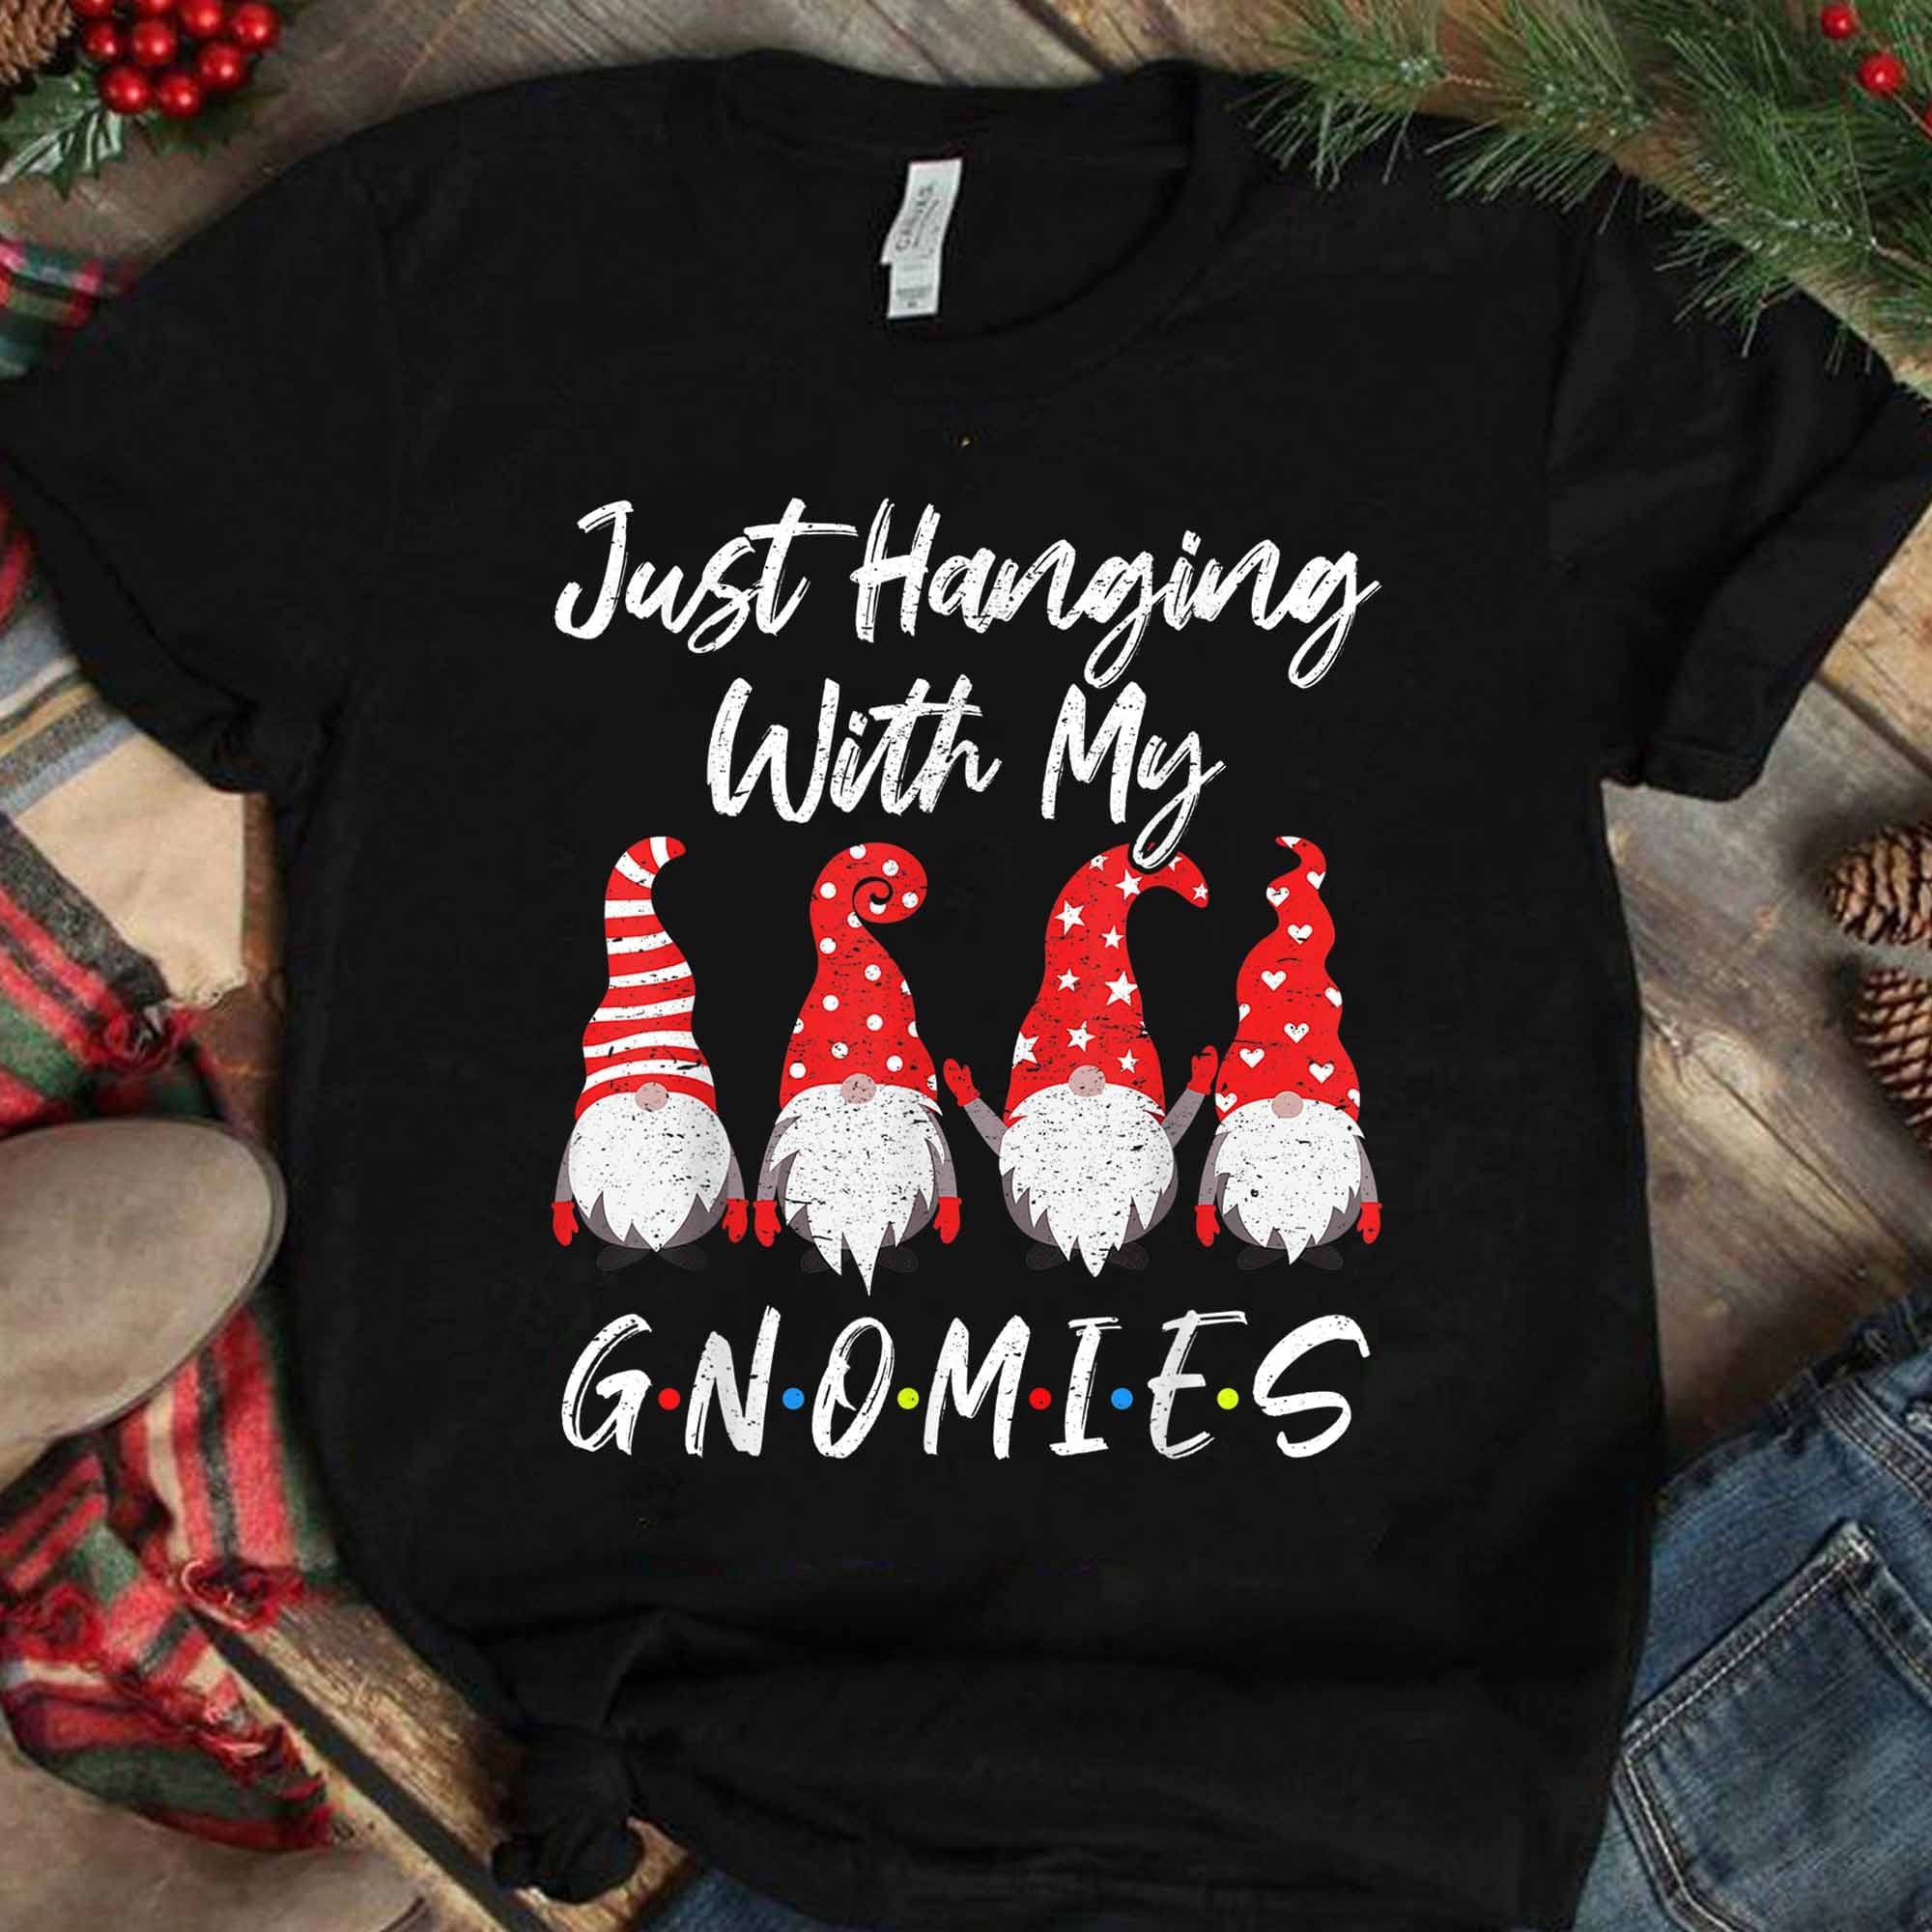 Just hanging with Gnomies - Garden gnome, Friends movie T-shirt